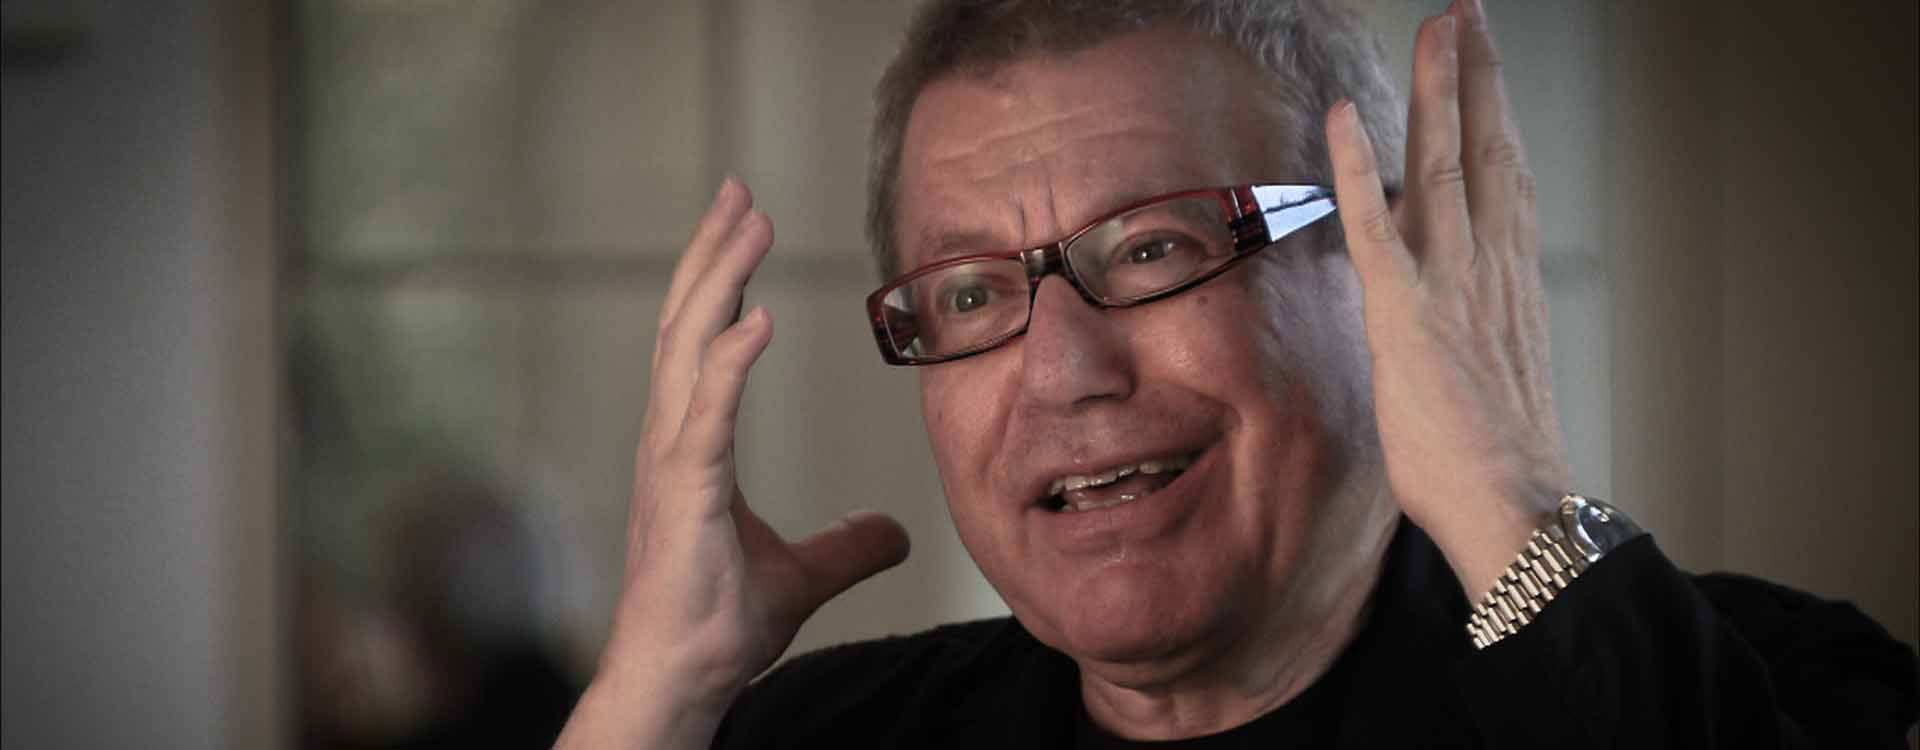 One Day in Life - A Concert Project by Daniel Libeskind and Alte Oper Frankfurt